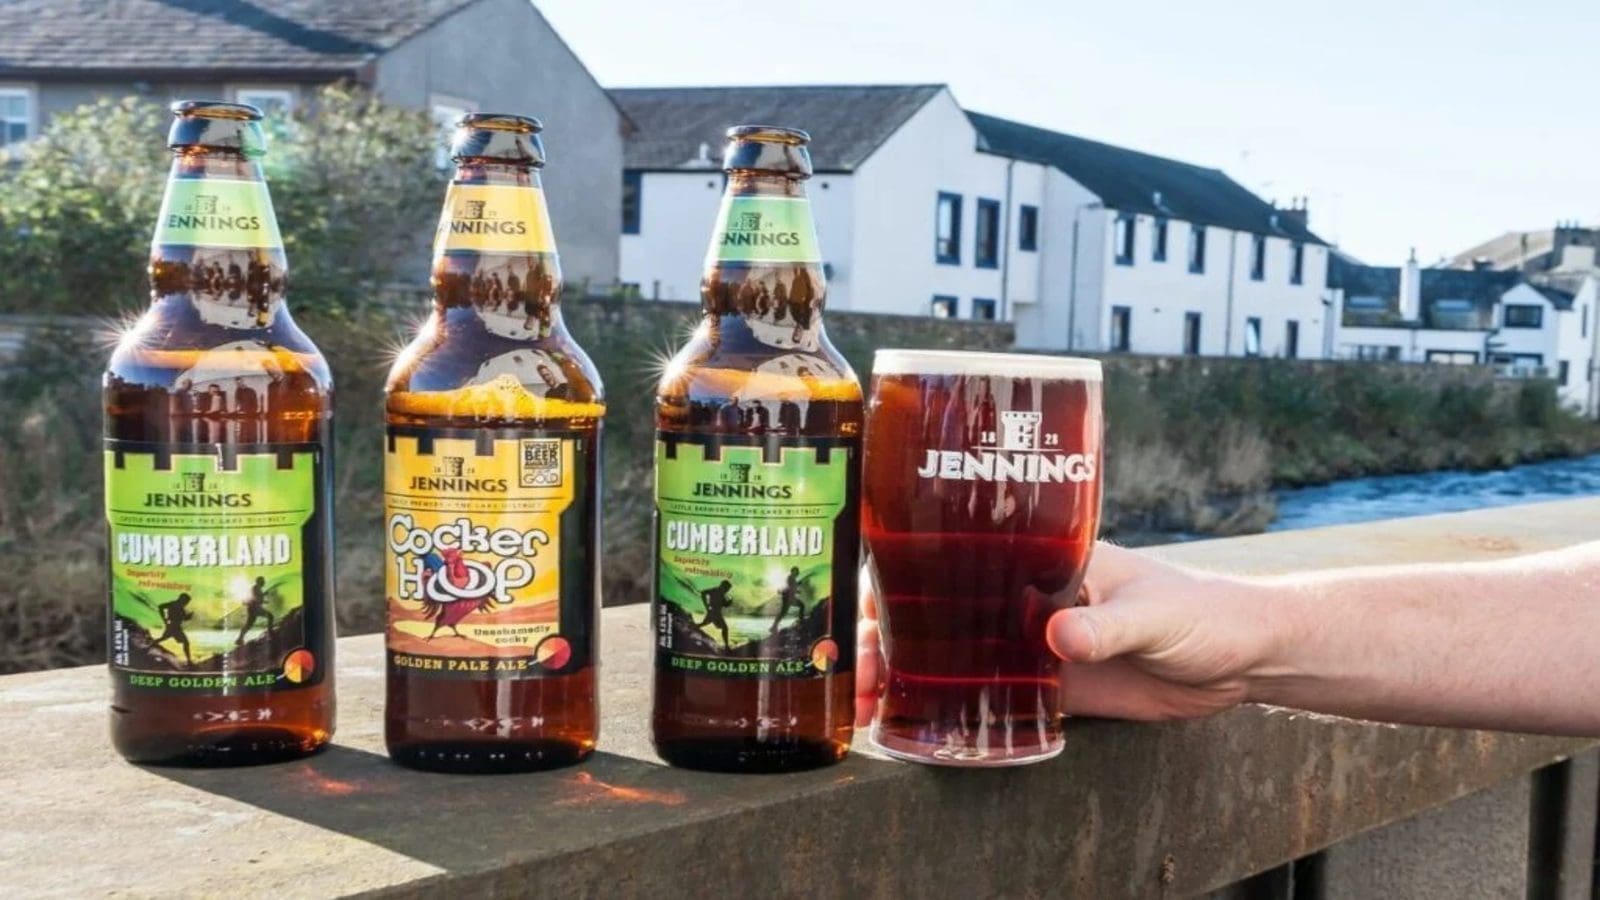 Carlsberg Marston’s Brewing Company to end Jennings Brewery operations